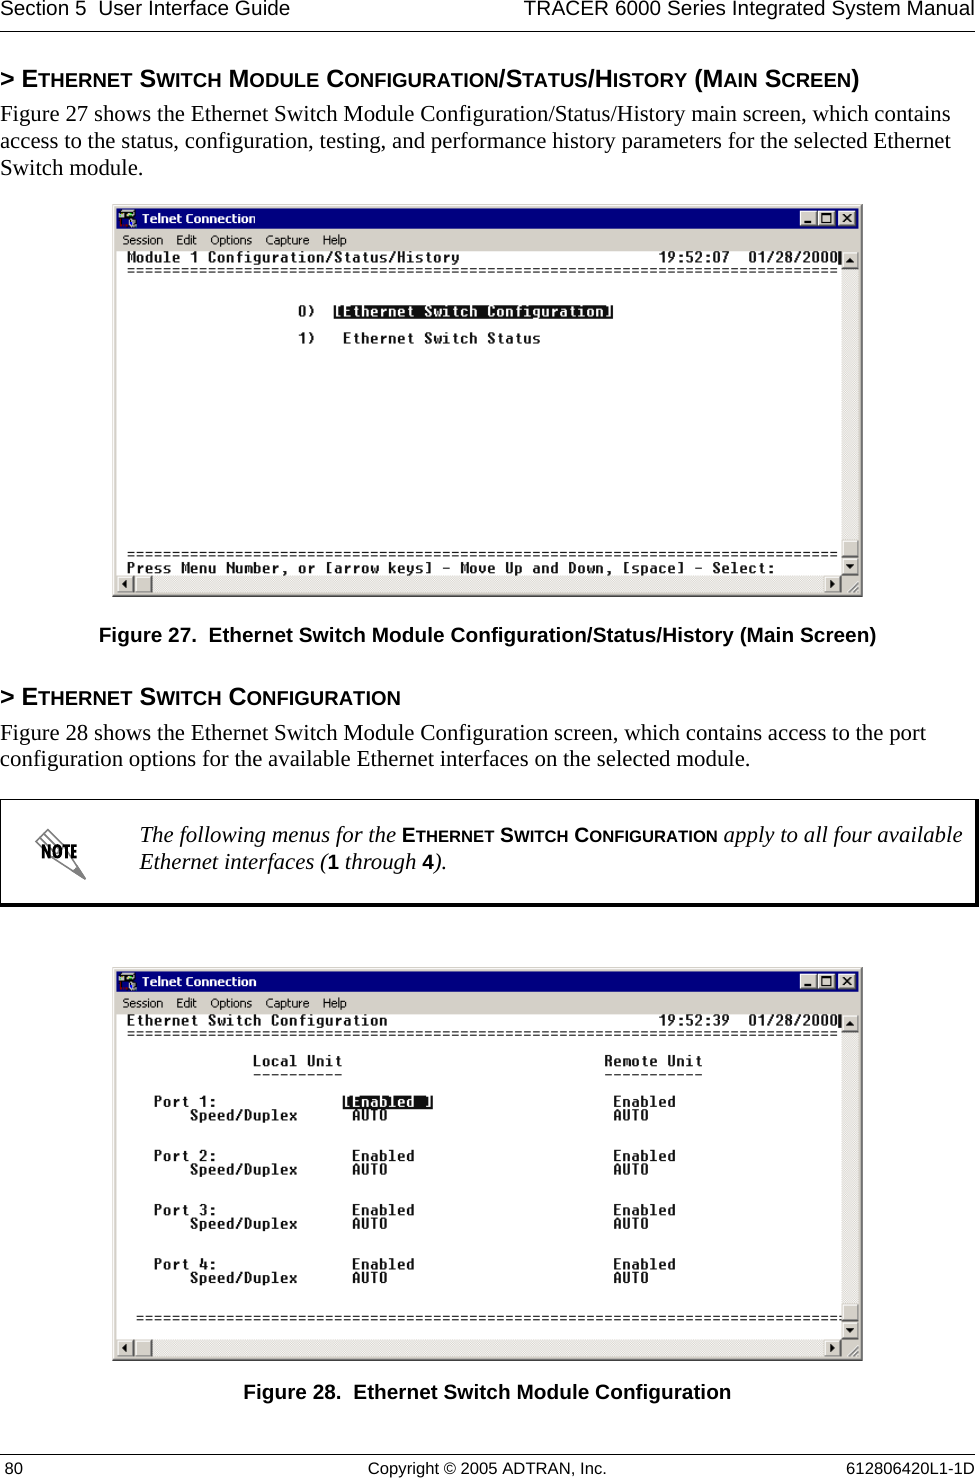 Section 5  User Interface Guide TRACER 6000 Series Integrated System Manual 80 Copyright © 2005 ADTRAN, Inc. 612806420L1-1D&gt; ETHERNET SWITCH MODULE CONFIGURATION/STATUS/HISTORY (MAIN SCREEN)Figure 27 shows the Ethernet Switch Module Configuration/Status/History main screen, which contains access to the status, configuration, testing, and performance history parameters for the selected Ethernet Switch module.Figure 27.  Ethernet Switch Module Configuration/Status/History (Main Screen)&gt; ETHERNET SWITCH CONFIGURATIONFigure 28 shows the Ethernet Switch Module Configuration screen, which contains access to the port configuration options for the available Ethernet interfaces on the selected module.Figure 28.  Ethernet Switch Module ConfigurationThe following menus for the ETHERNET SWITCH CONFIGURATION apply to all four available Ethernet interfaces (1 through 4).